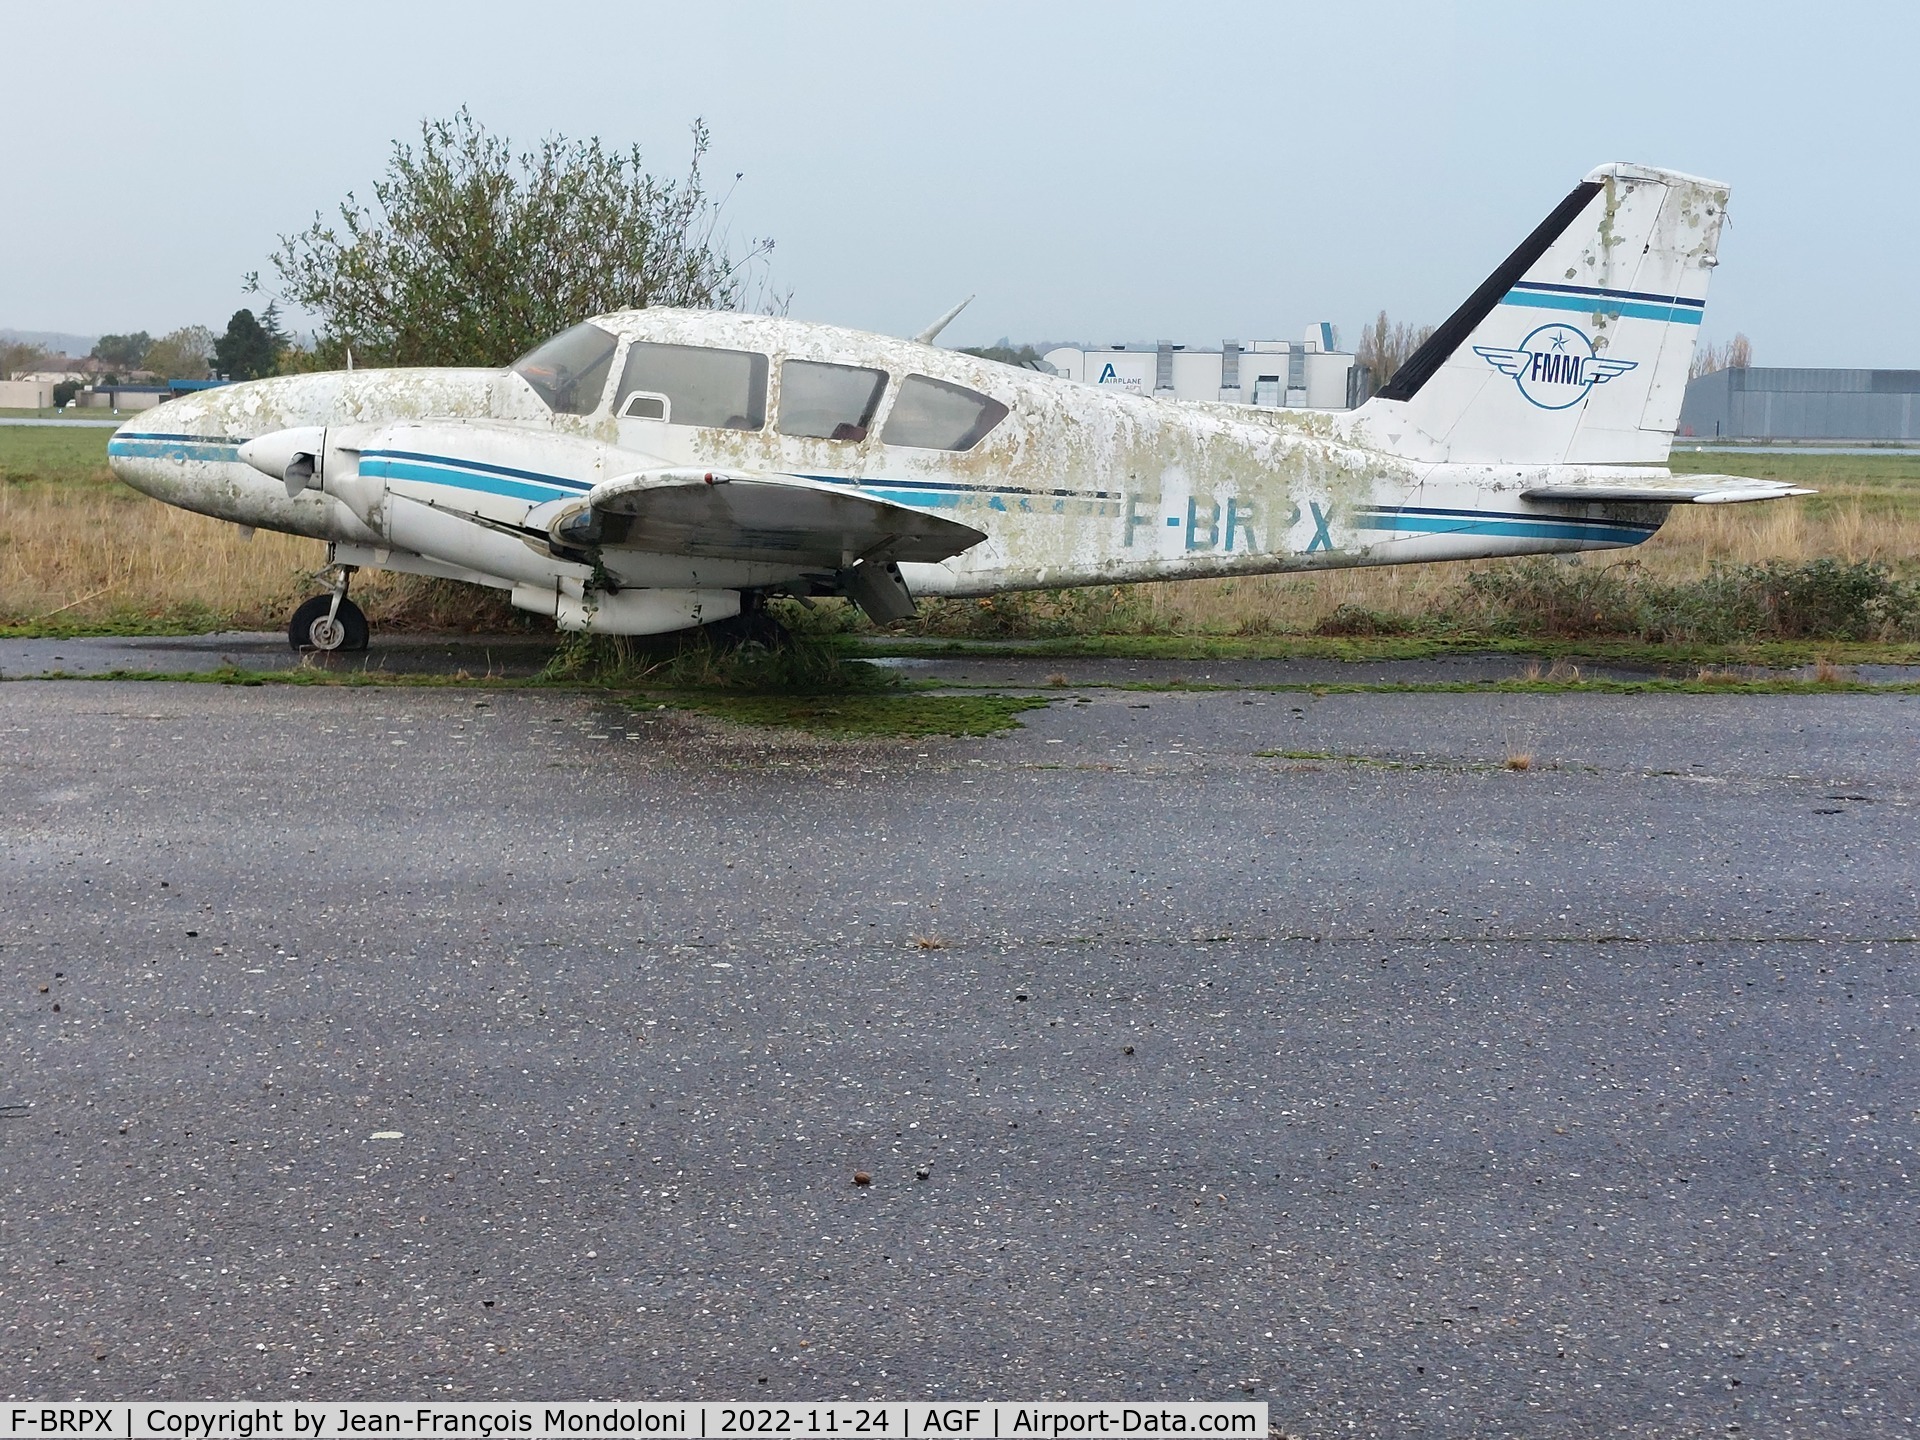 F-BRPX, Piper PA-23-250 Aztec C/N 274285, No sky anymore...